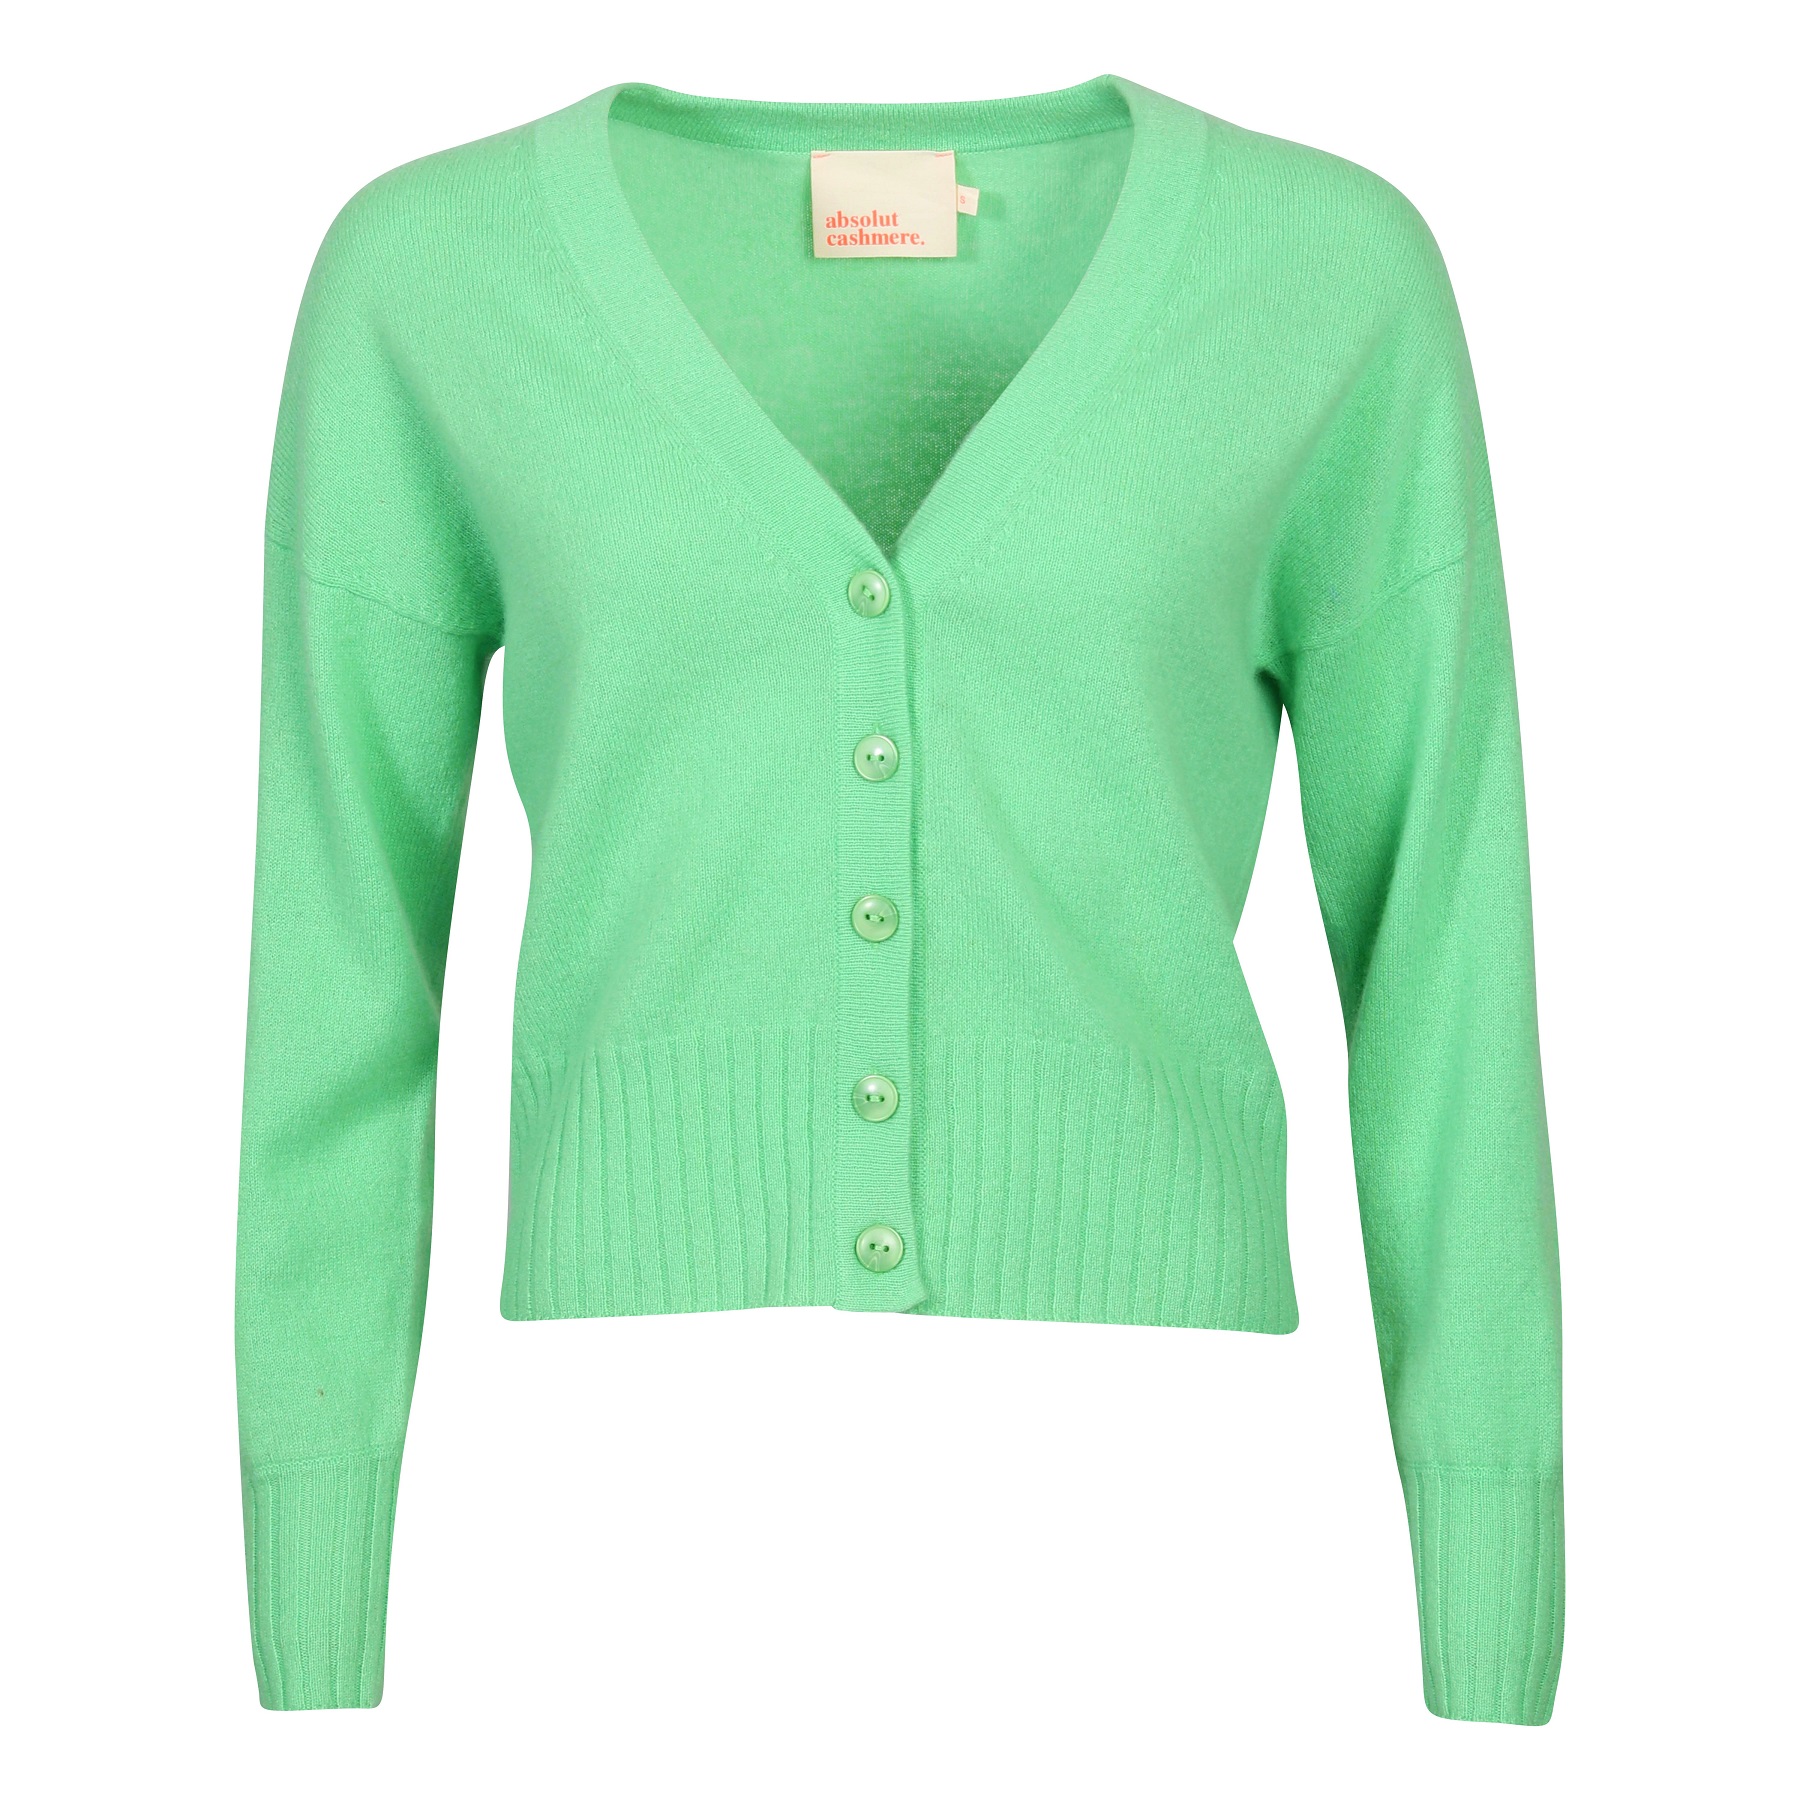 Absolut Cashmere Cardigan in Light Green L